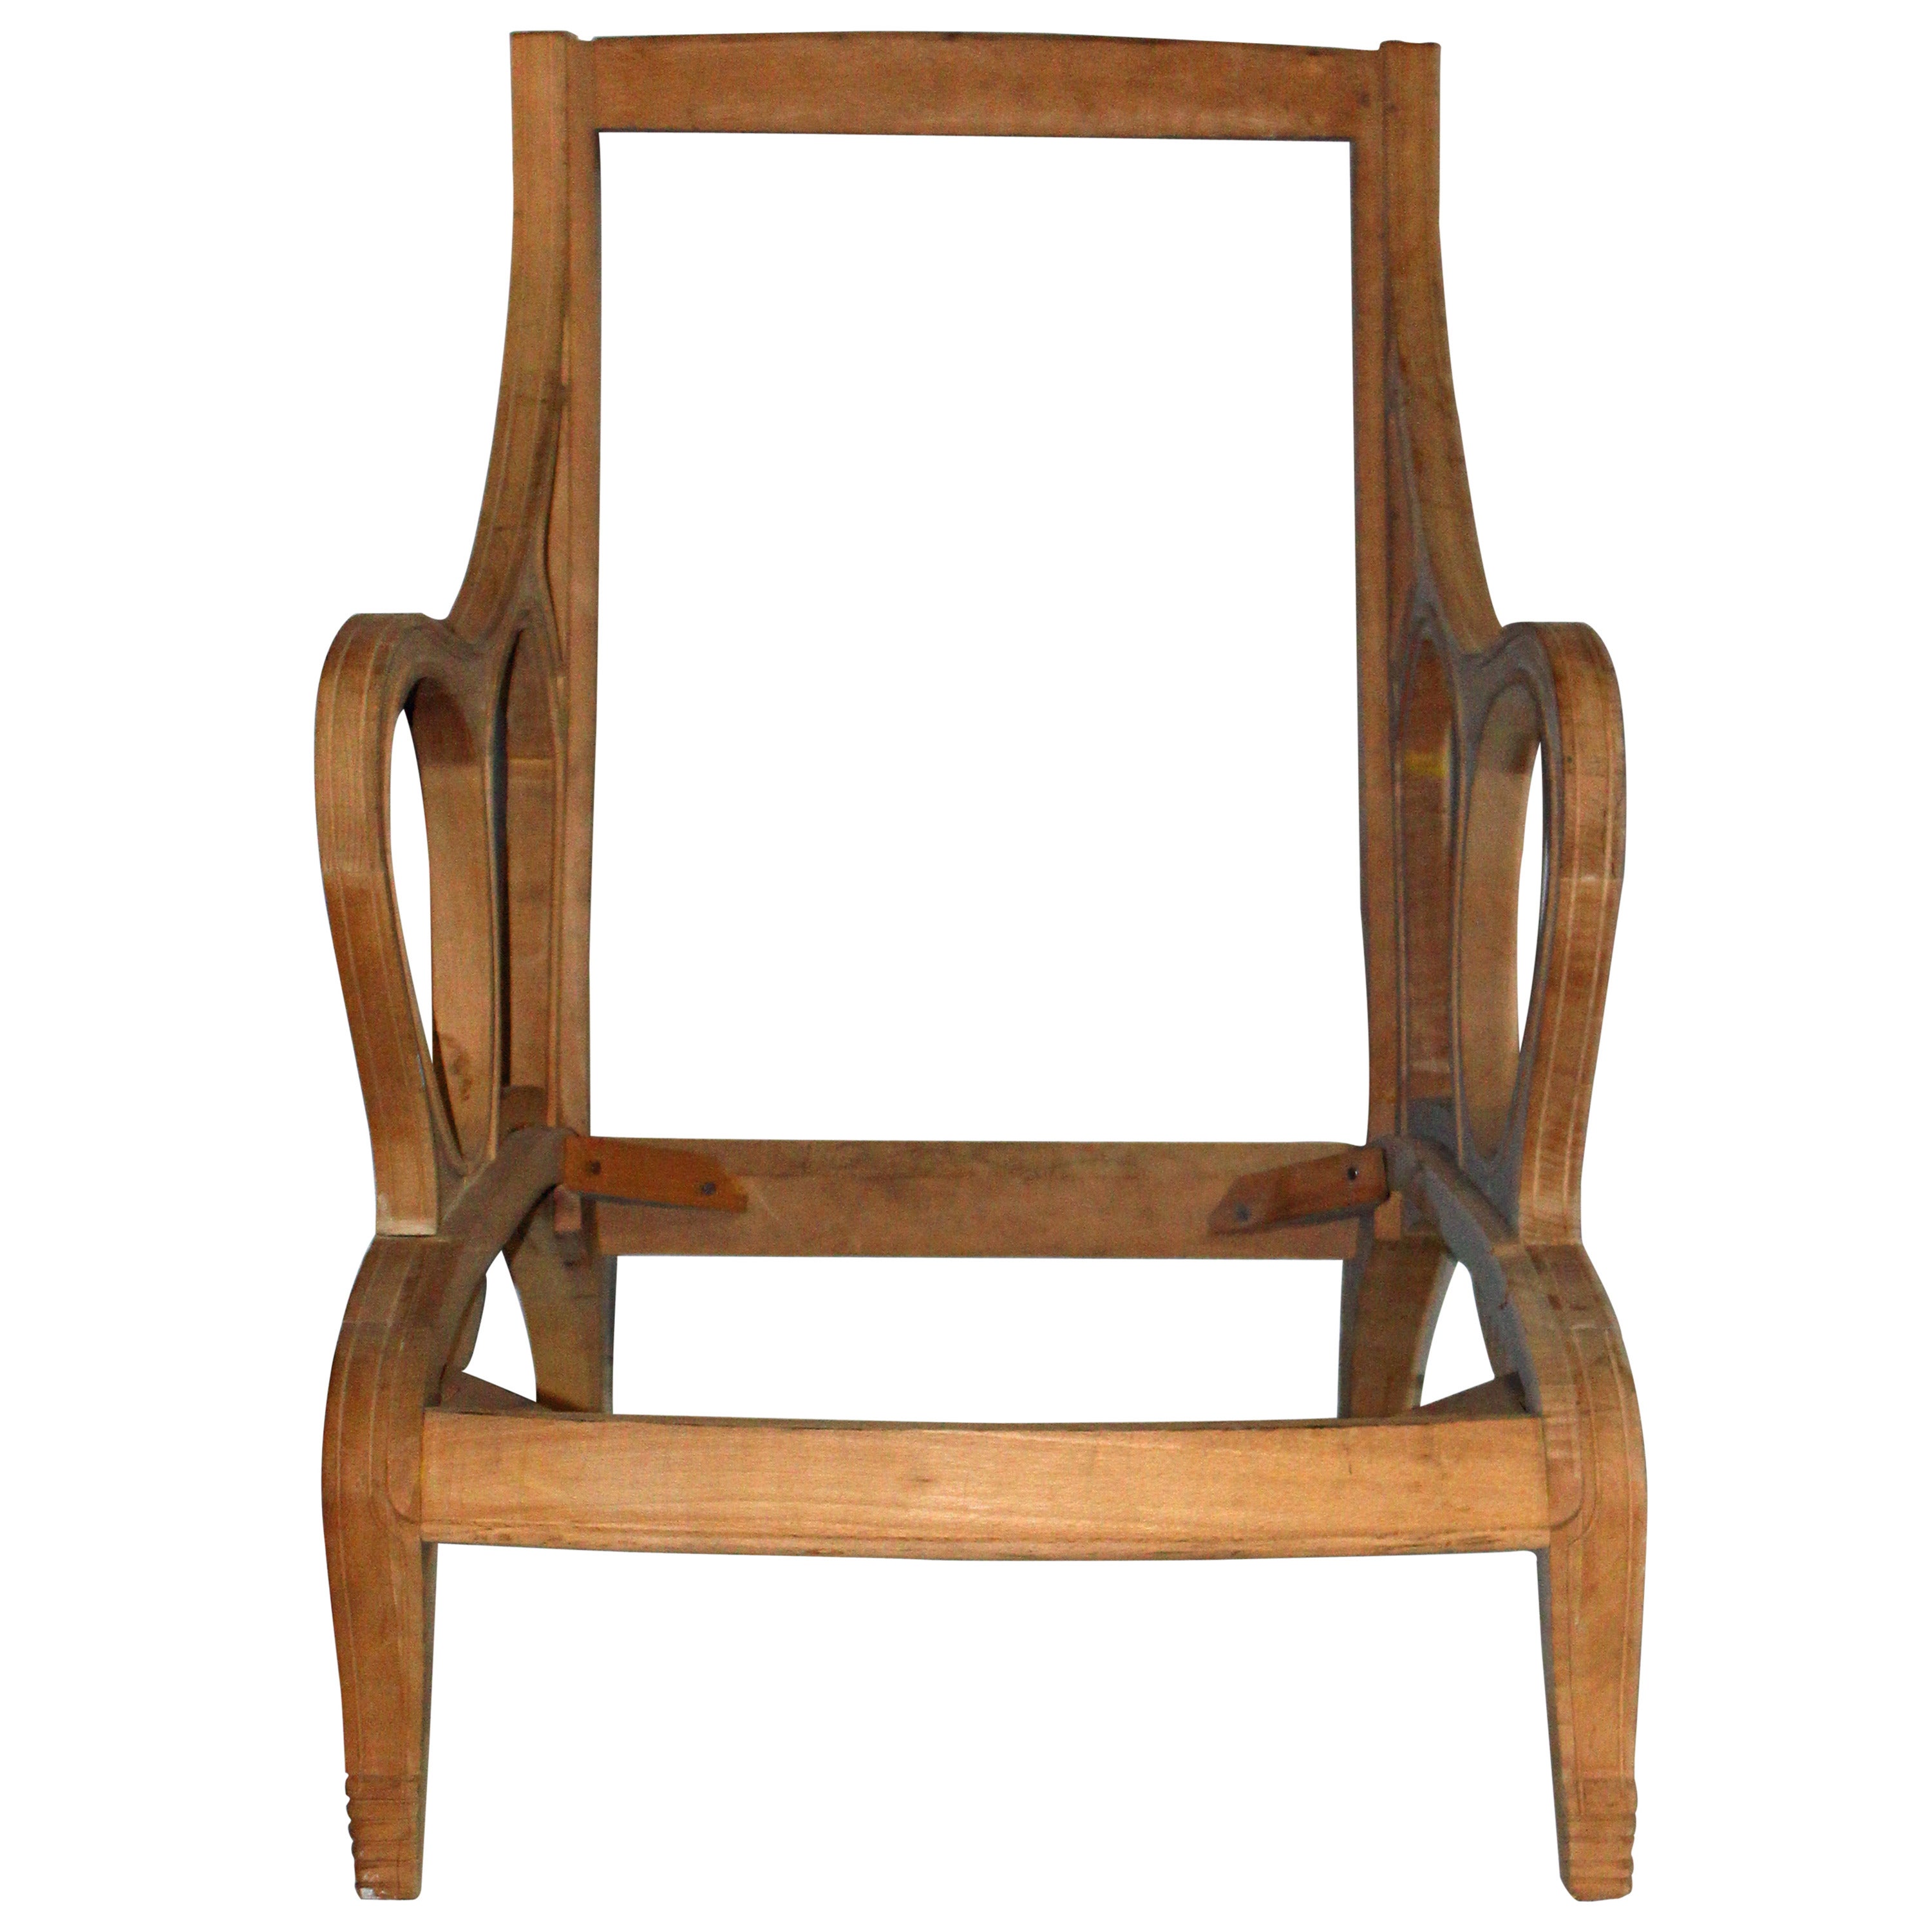 Chic Vintage Chair Frames from the David Barrett Collection For Sale